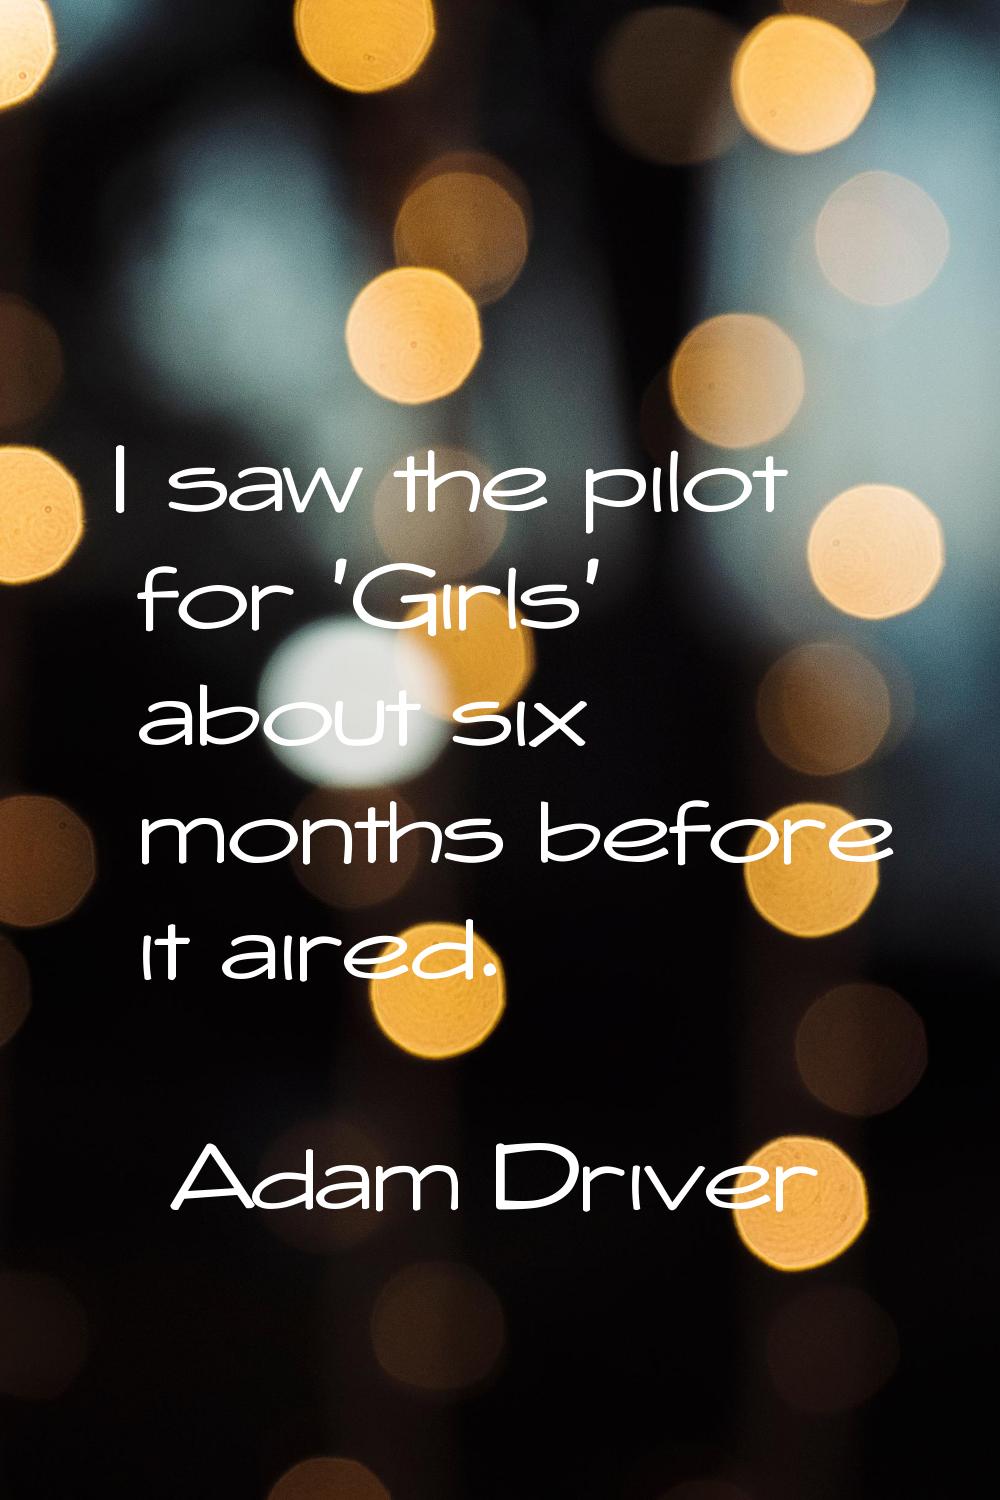 I saw the pilot for 'Girls' about six months before it aired.